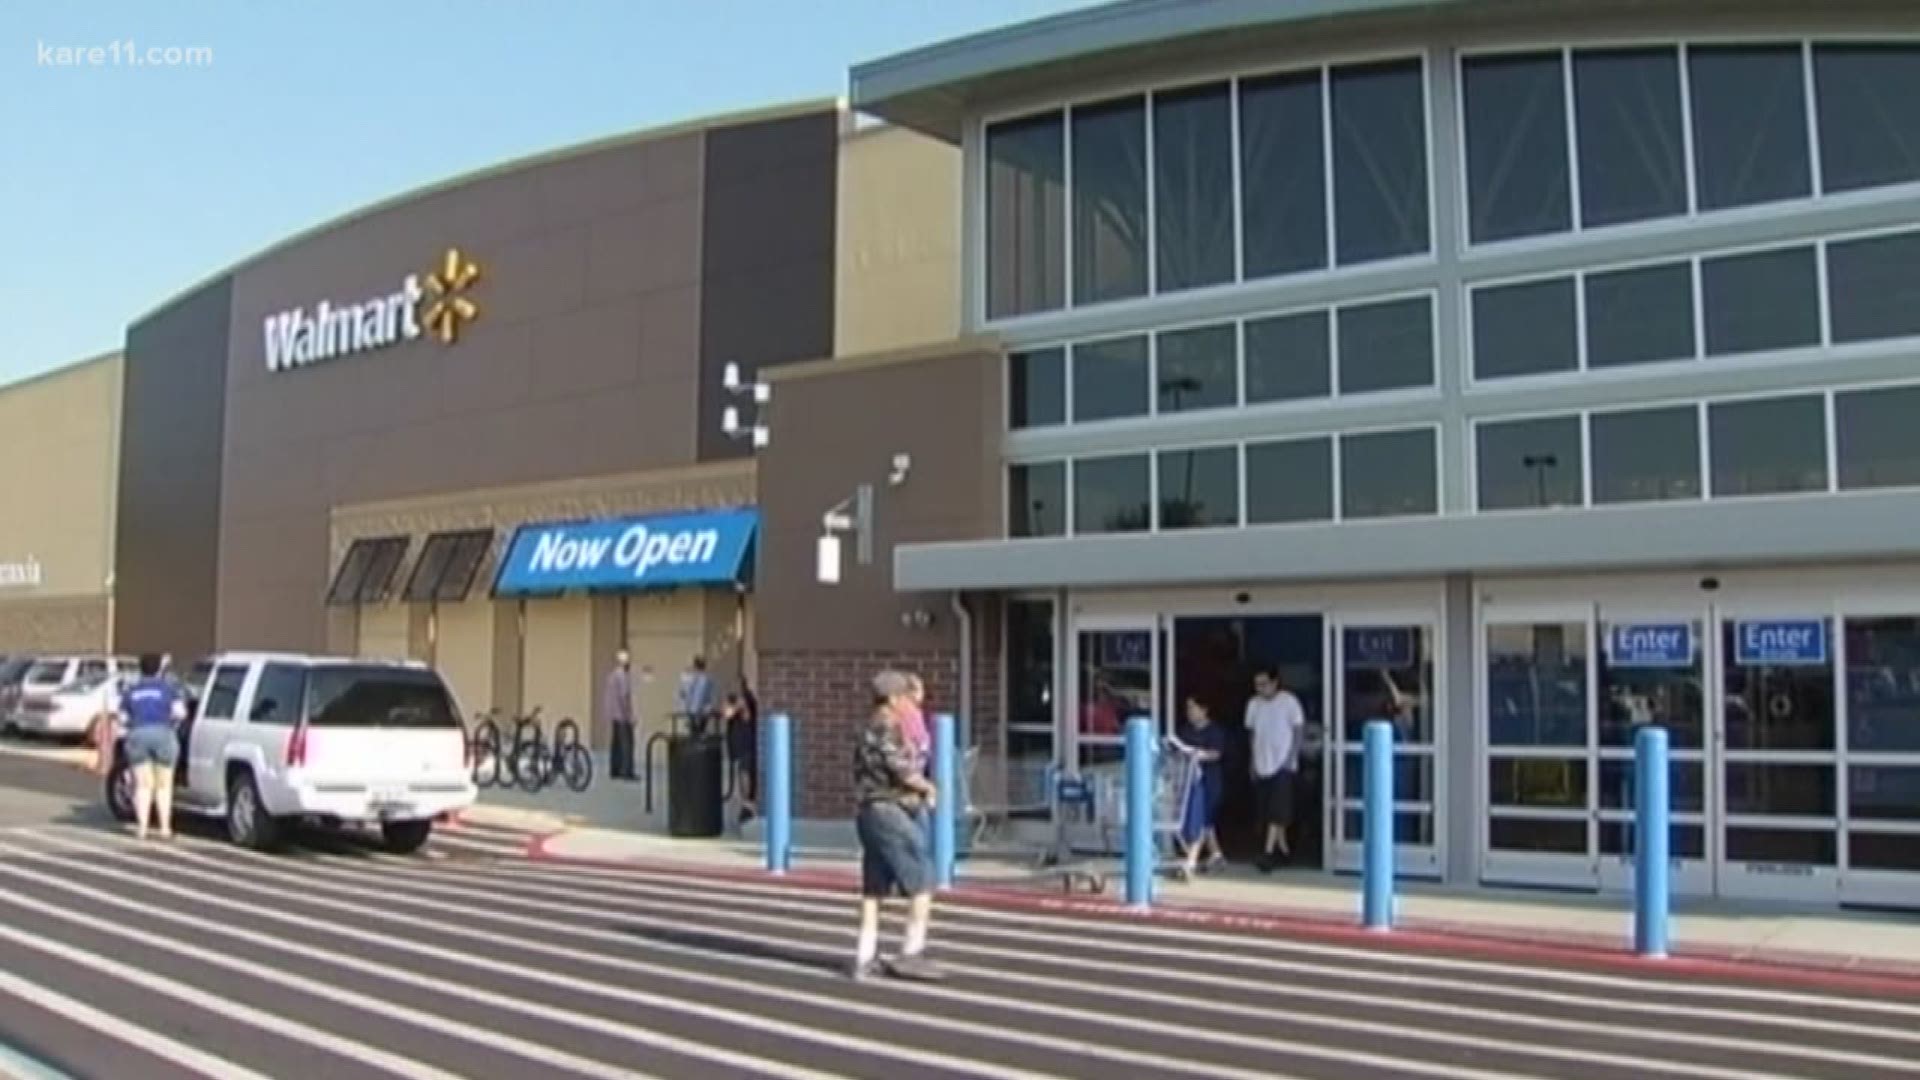 Some activists see the shooting at an El Paso Walmart as a chance for the retailer to stop selling guns. But the company says there are no plans to do so. https://kare11.tv/2Kyy5Ex